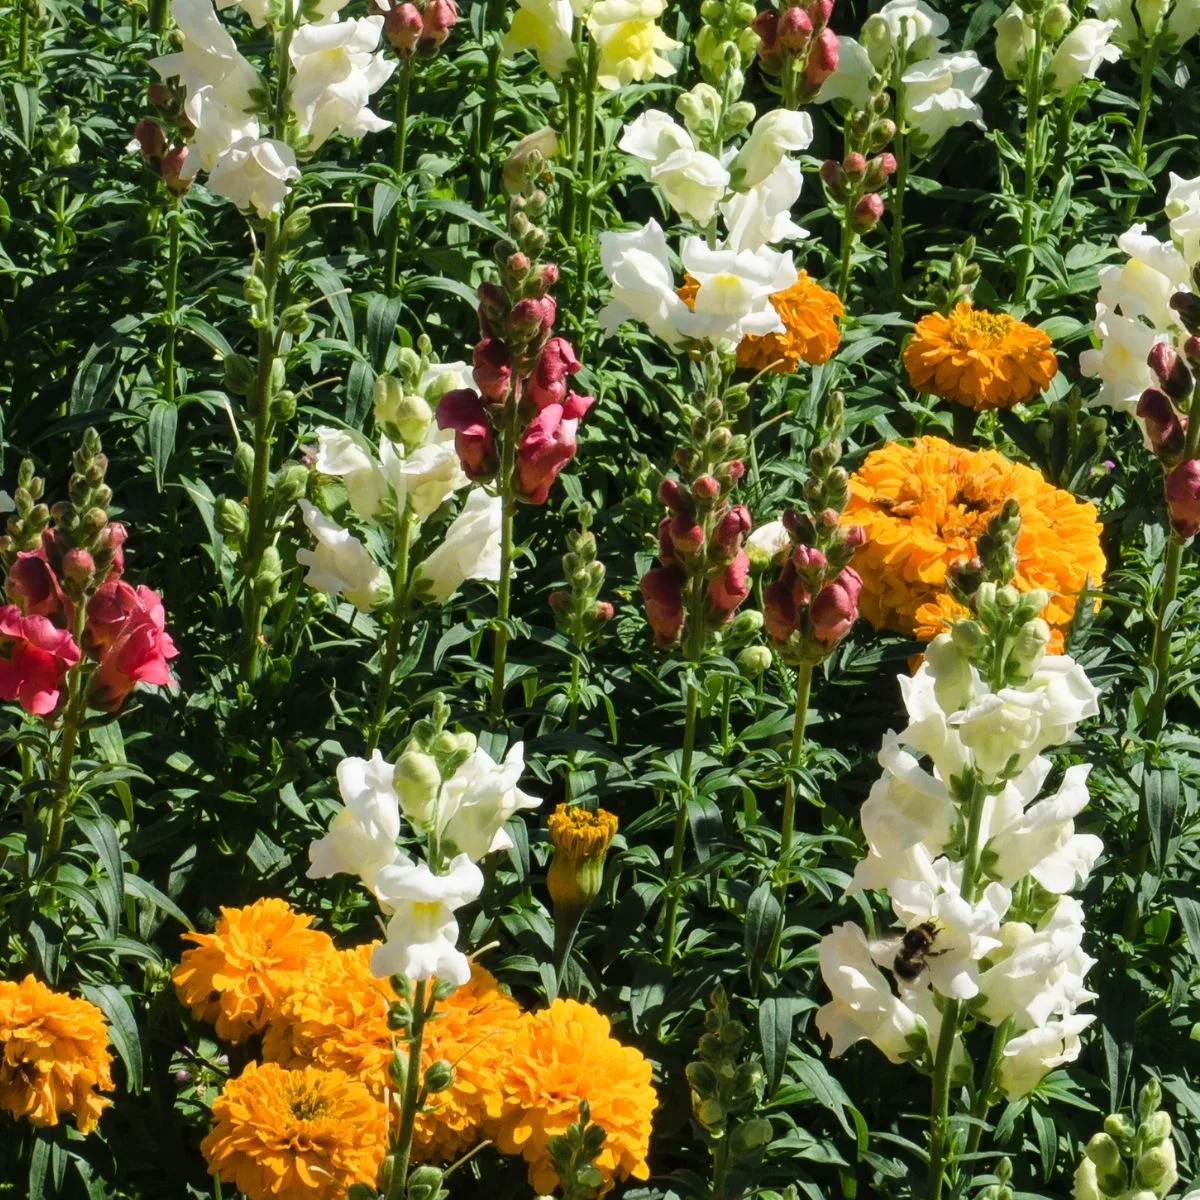 Snapdragons and marigolds planted together.